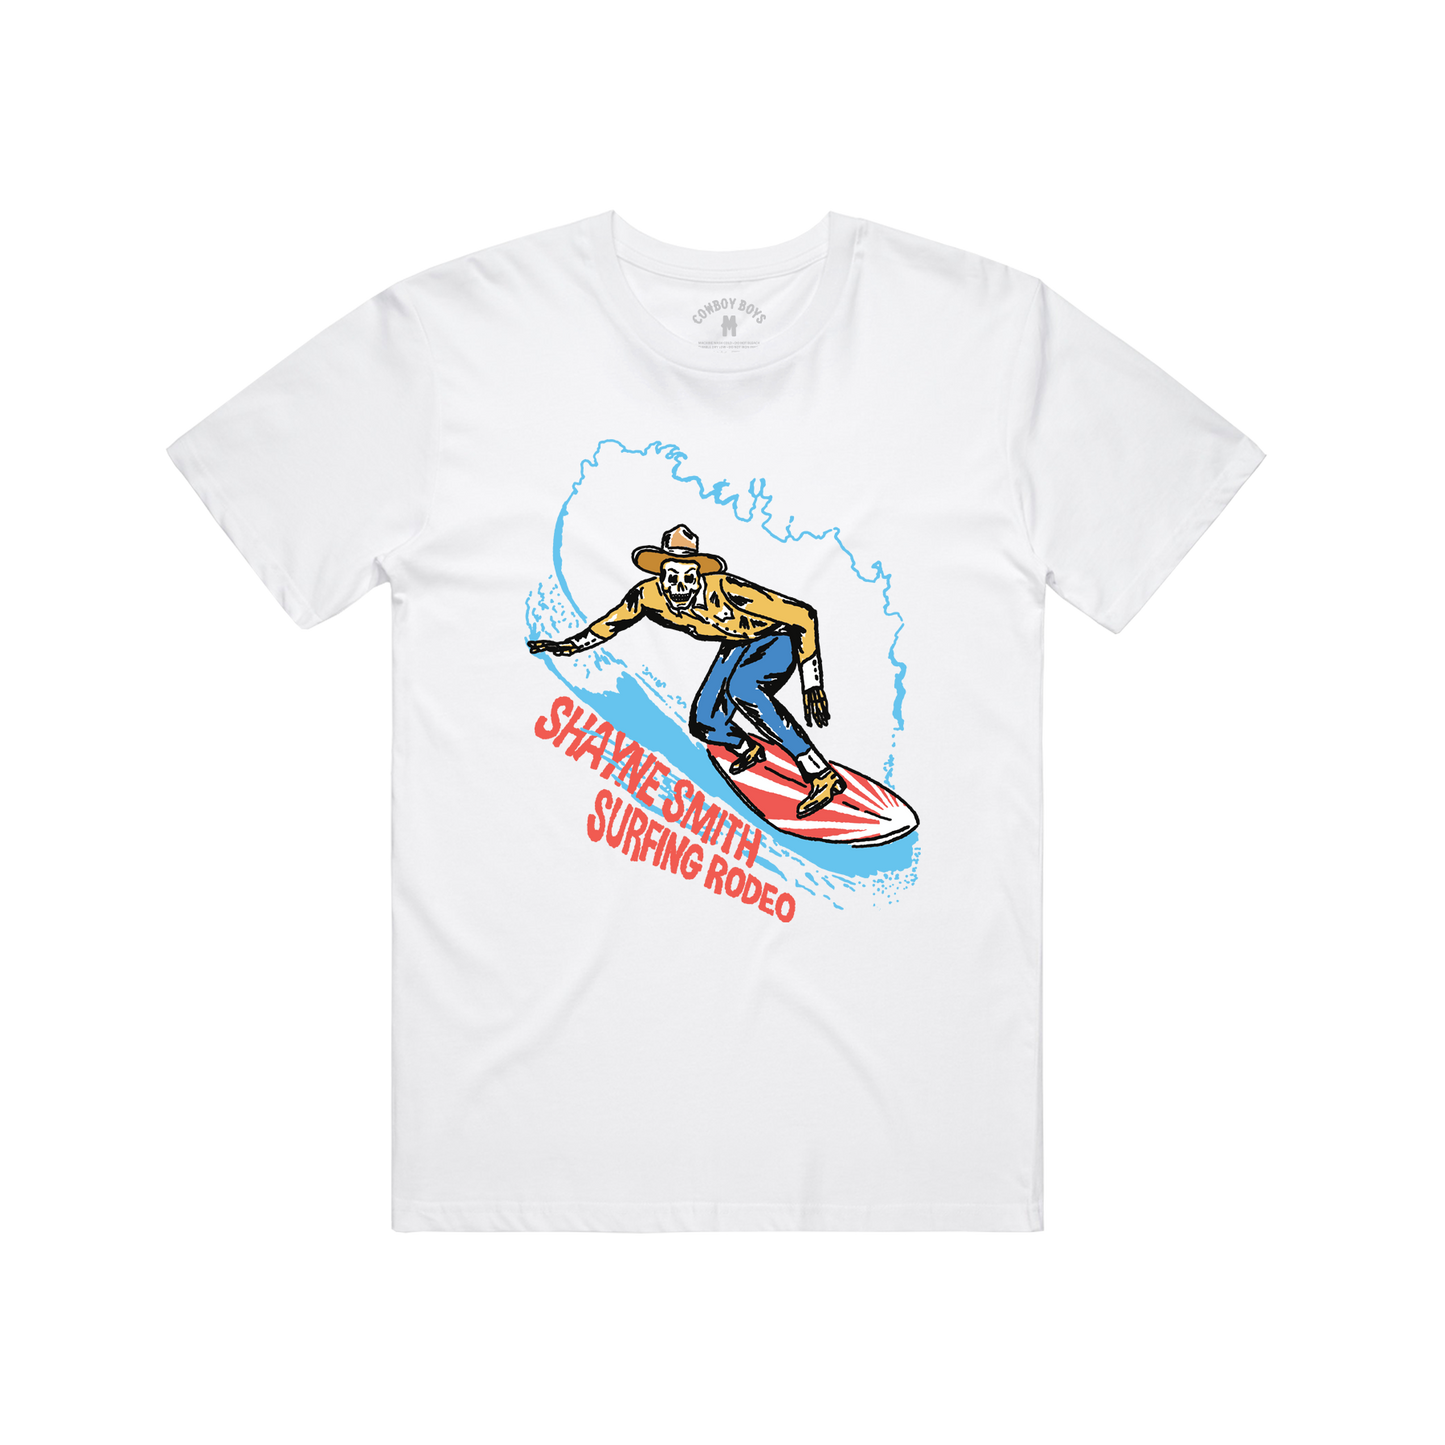 Surfing Rodeo Tee